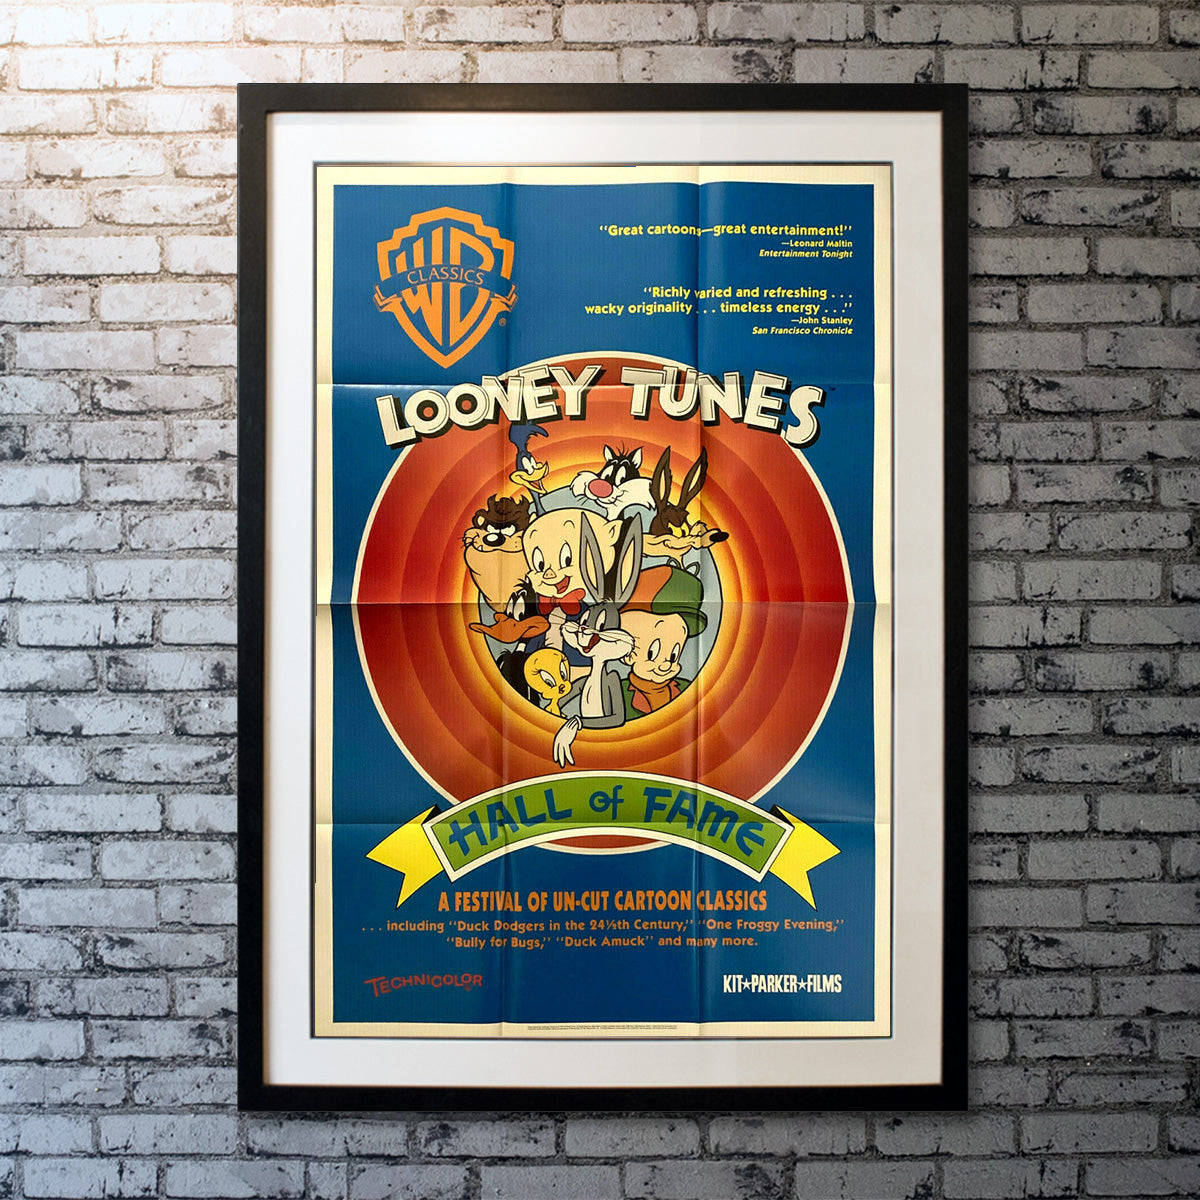 Looney Tunes Hall of Fame (1991)